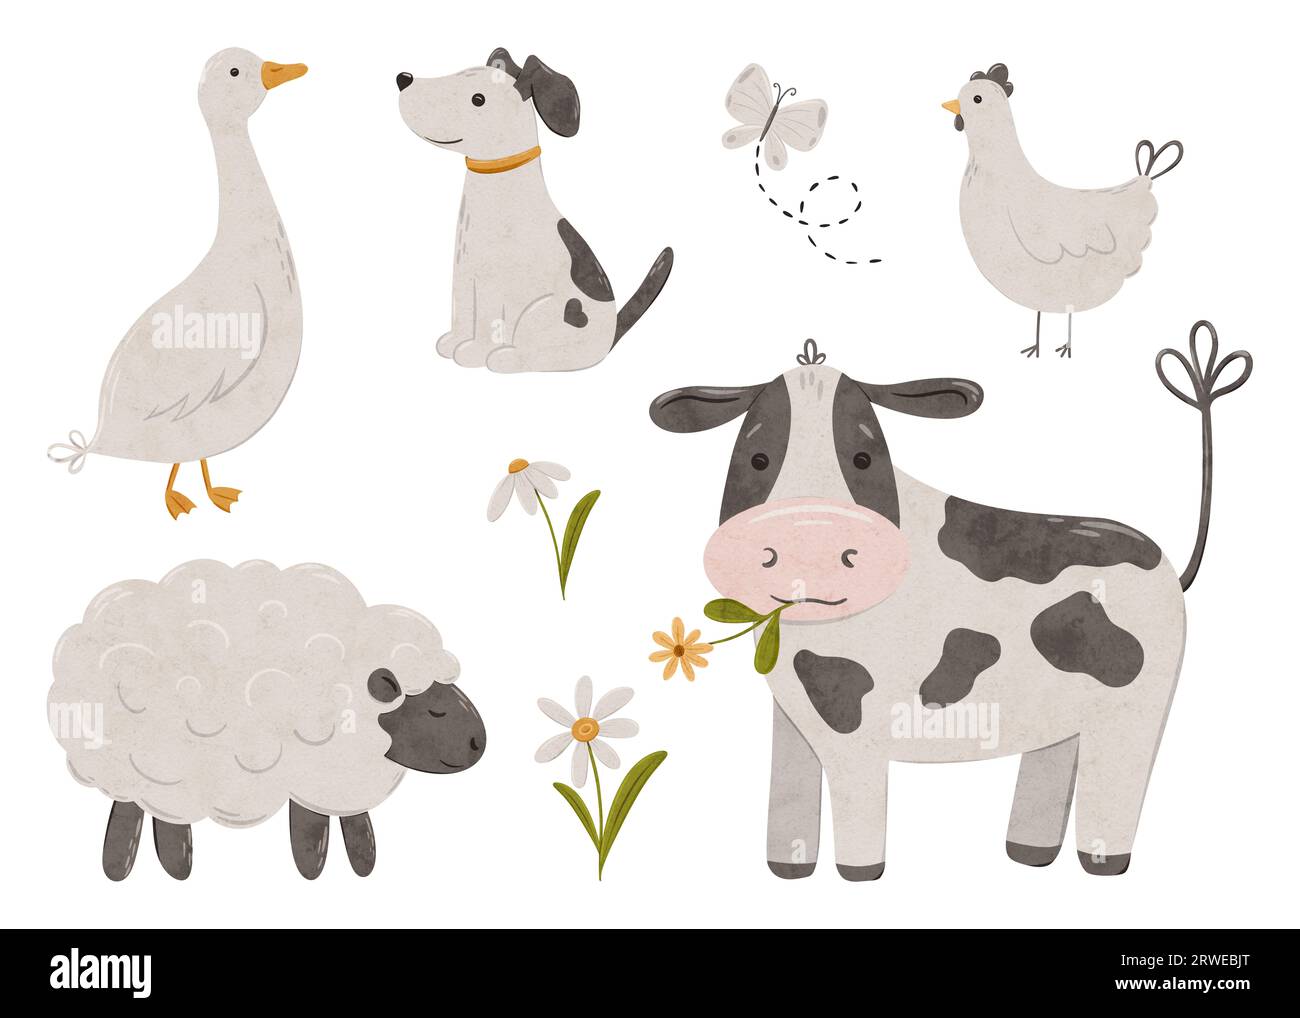 Cute farm animals collection, flat animal illustration, cow, sheep, chicken, dog, goose, butterfly and daisy. Cartoon characters for kids isolated Stock Photo